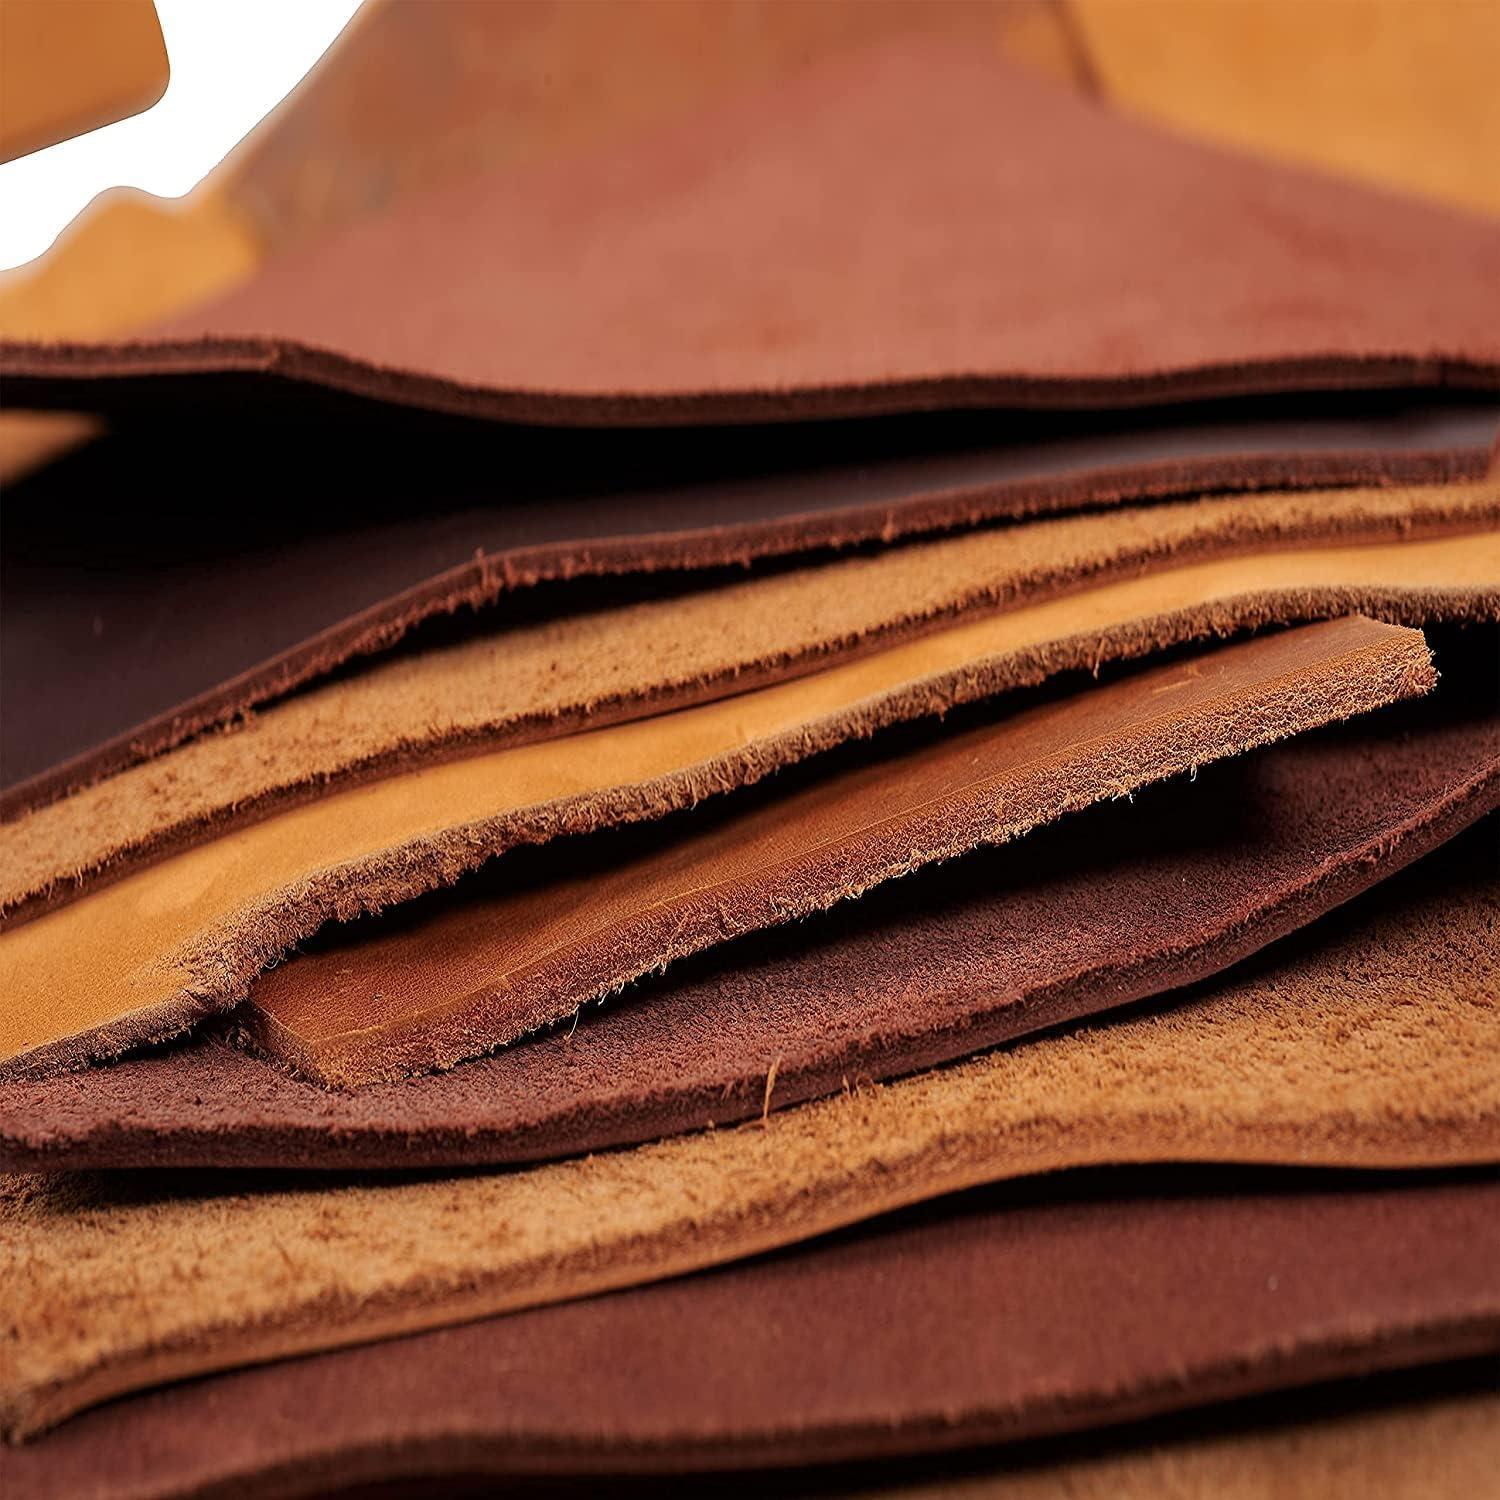 Mixed Leather Scrap - Leather Remnants & Scrap